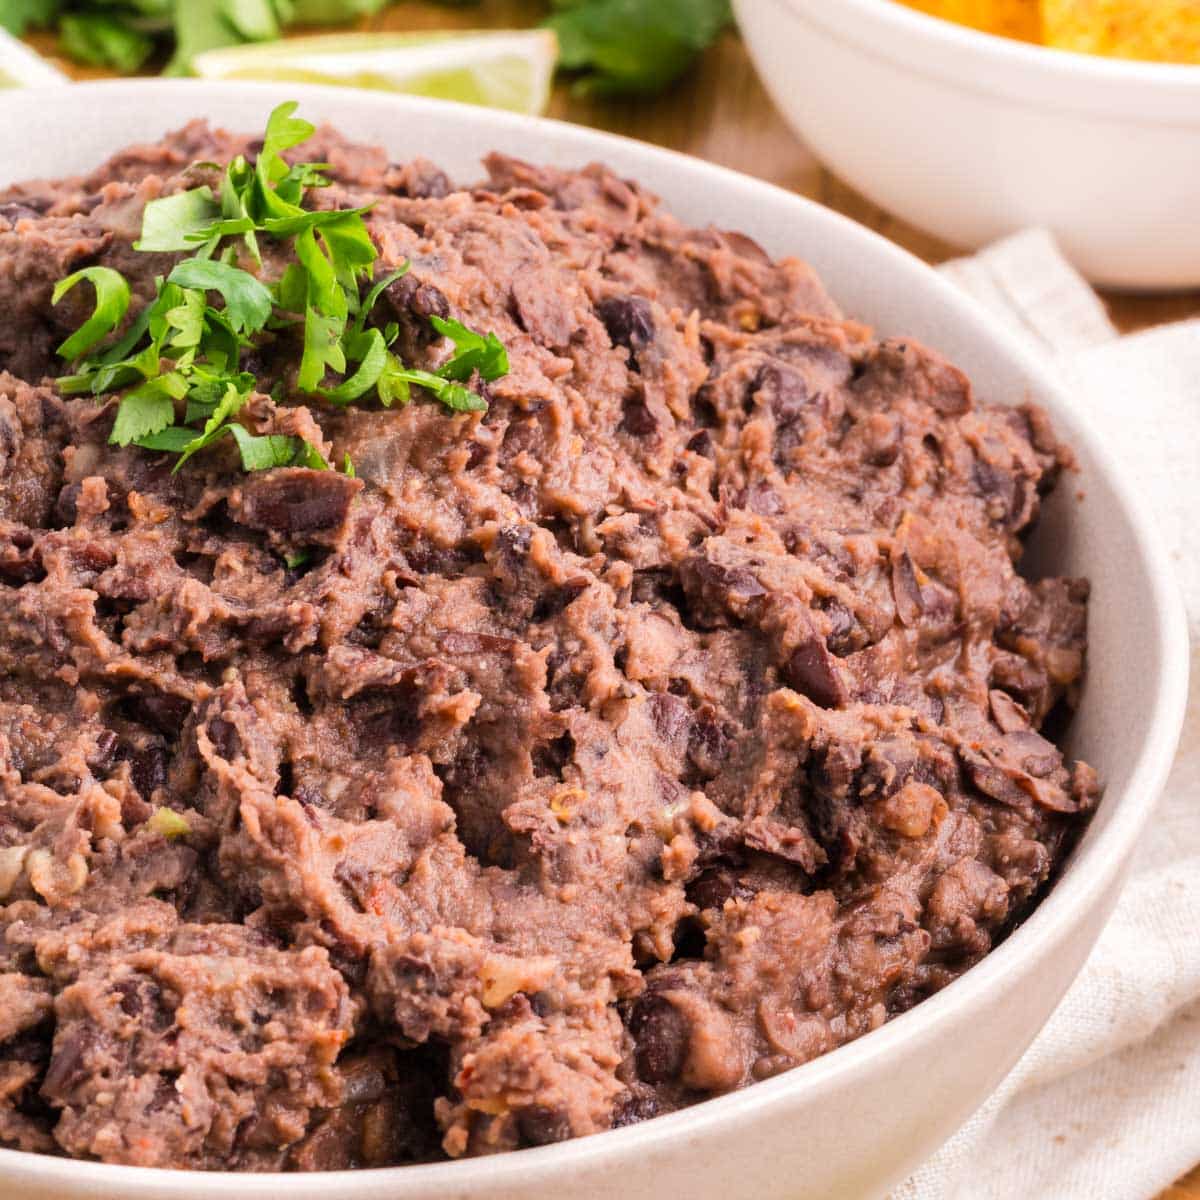 Refried black beans are in a white serving bowl with a green garnish.